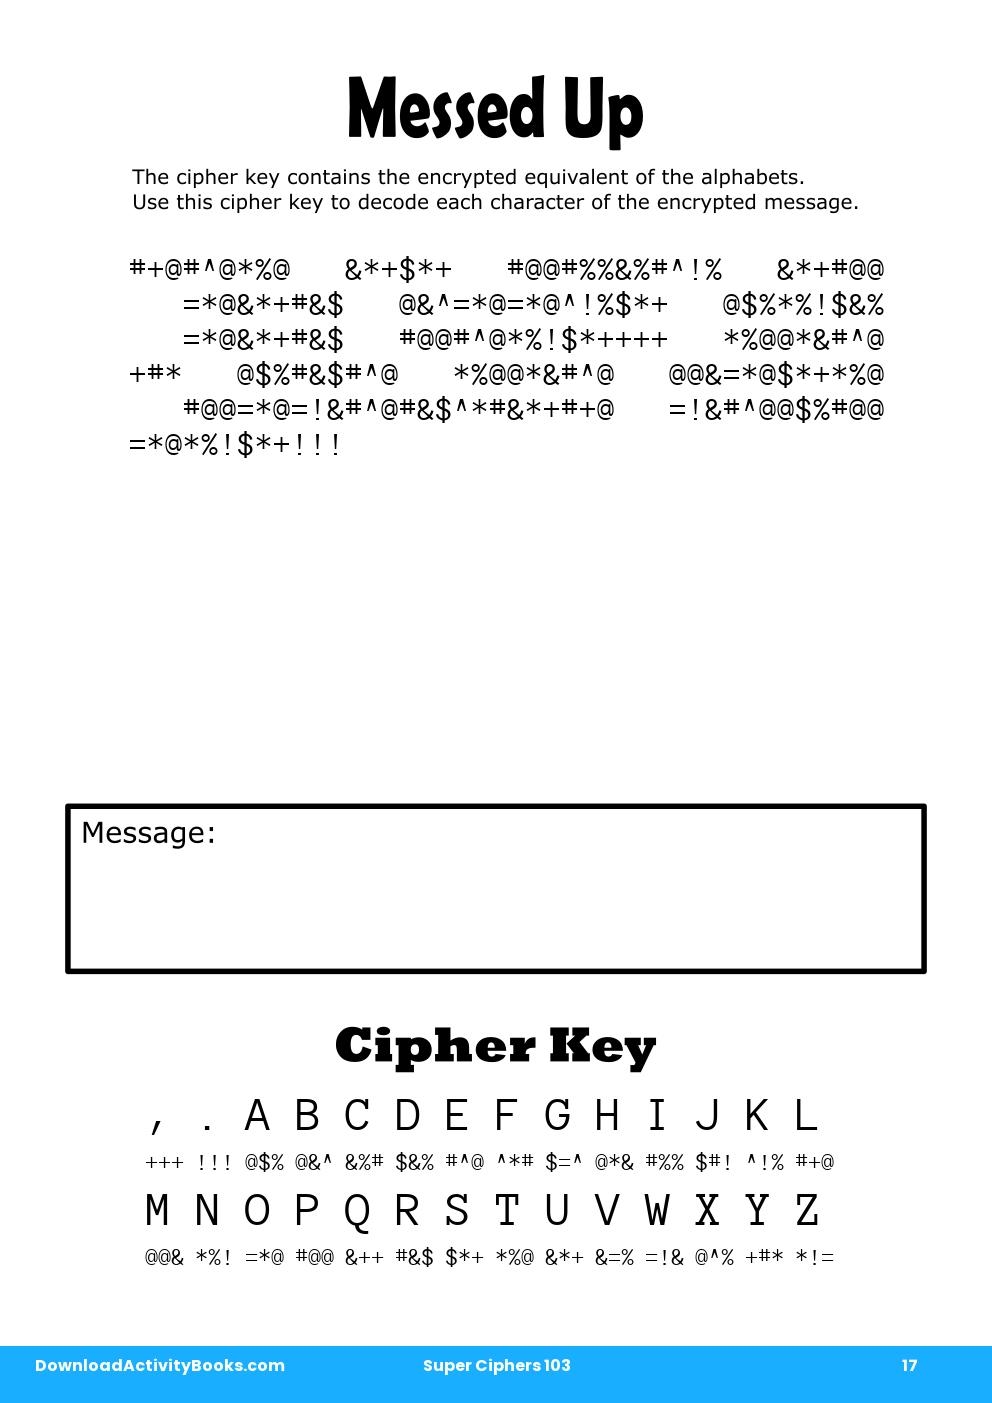 Messed Up in Super Ciphers 103